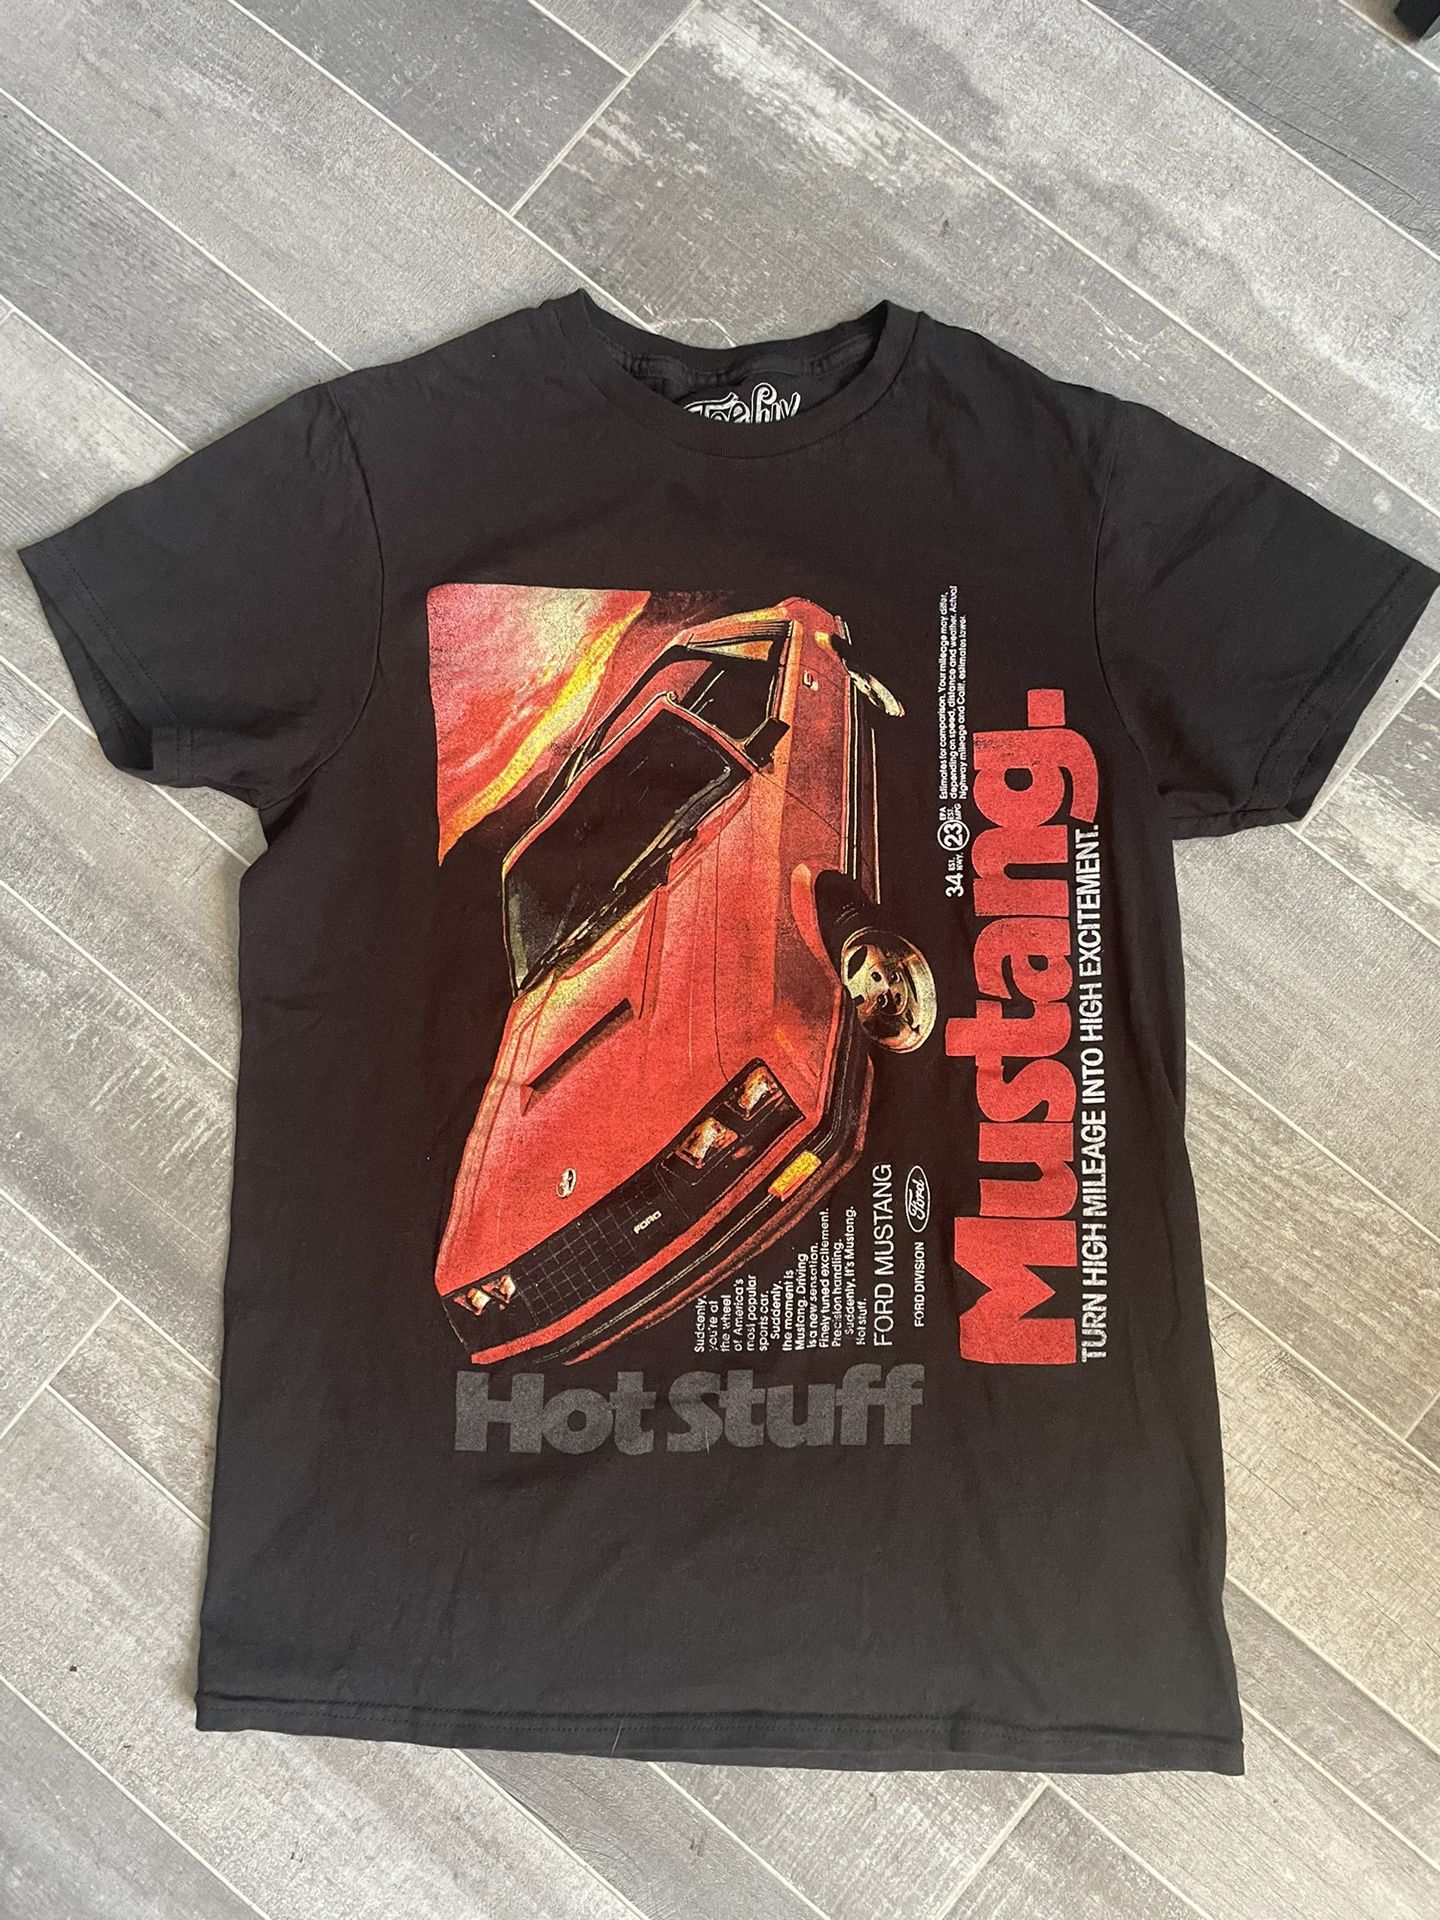 MENS BLACK MUSTANG CLASSIC.MUSCLE CAR CLUB COLLECTOR GRAPHIC TEE SIZE Small